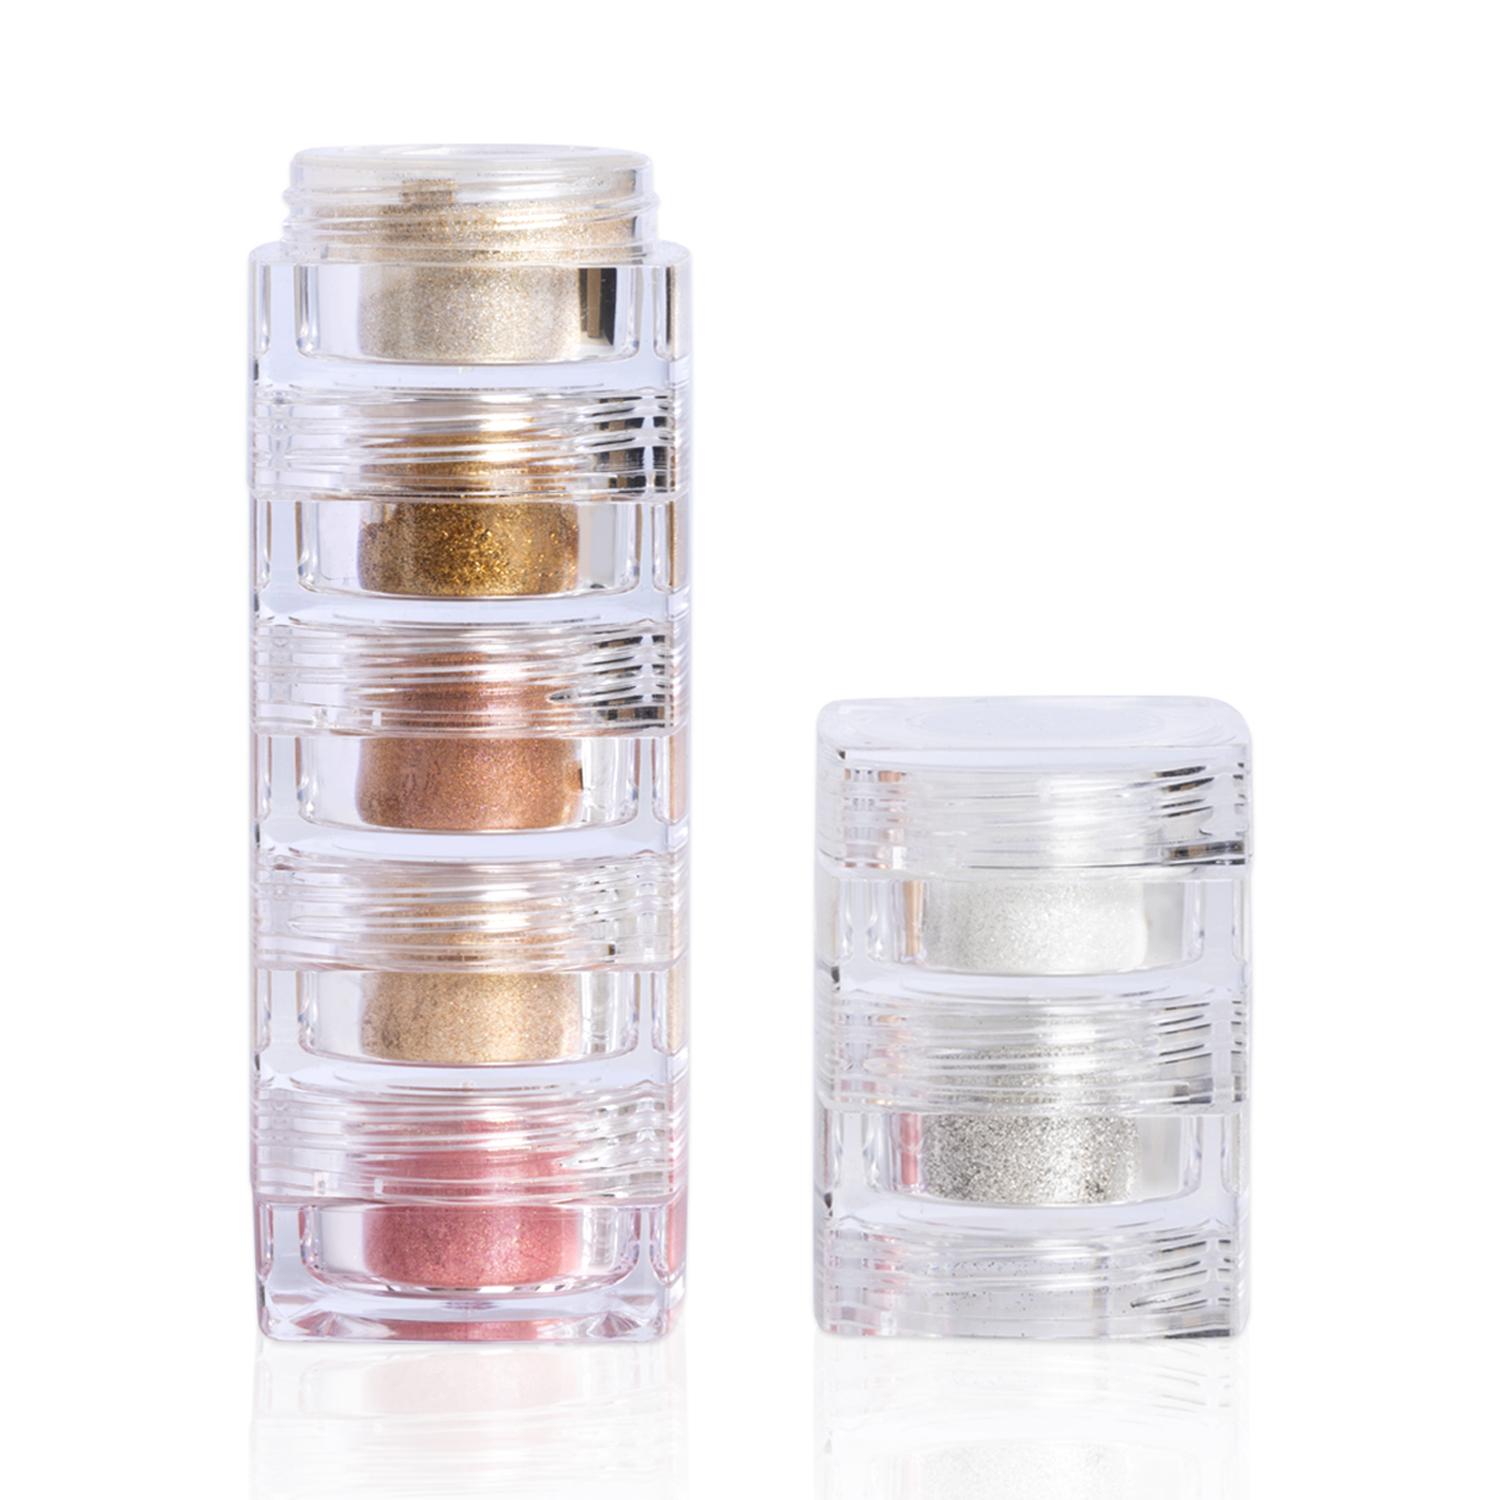 PAC | PAC 7-In-1 Pigment Tower - 01 Shade (2.5g)